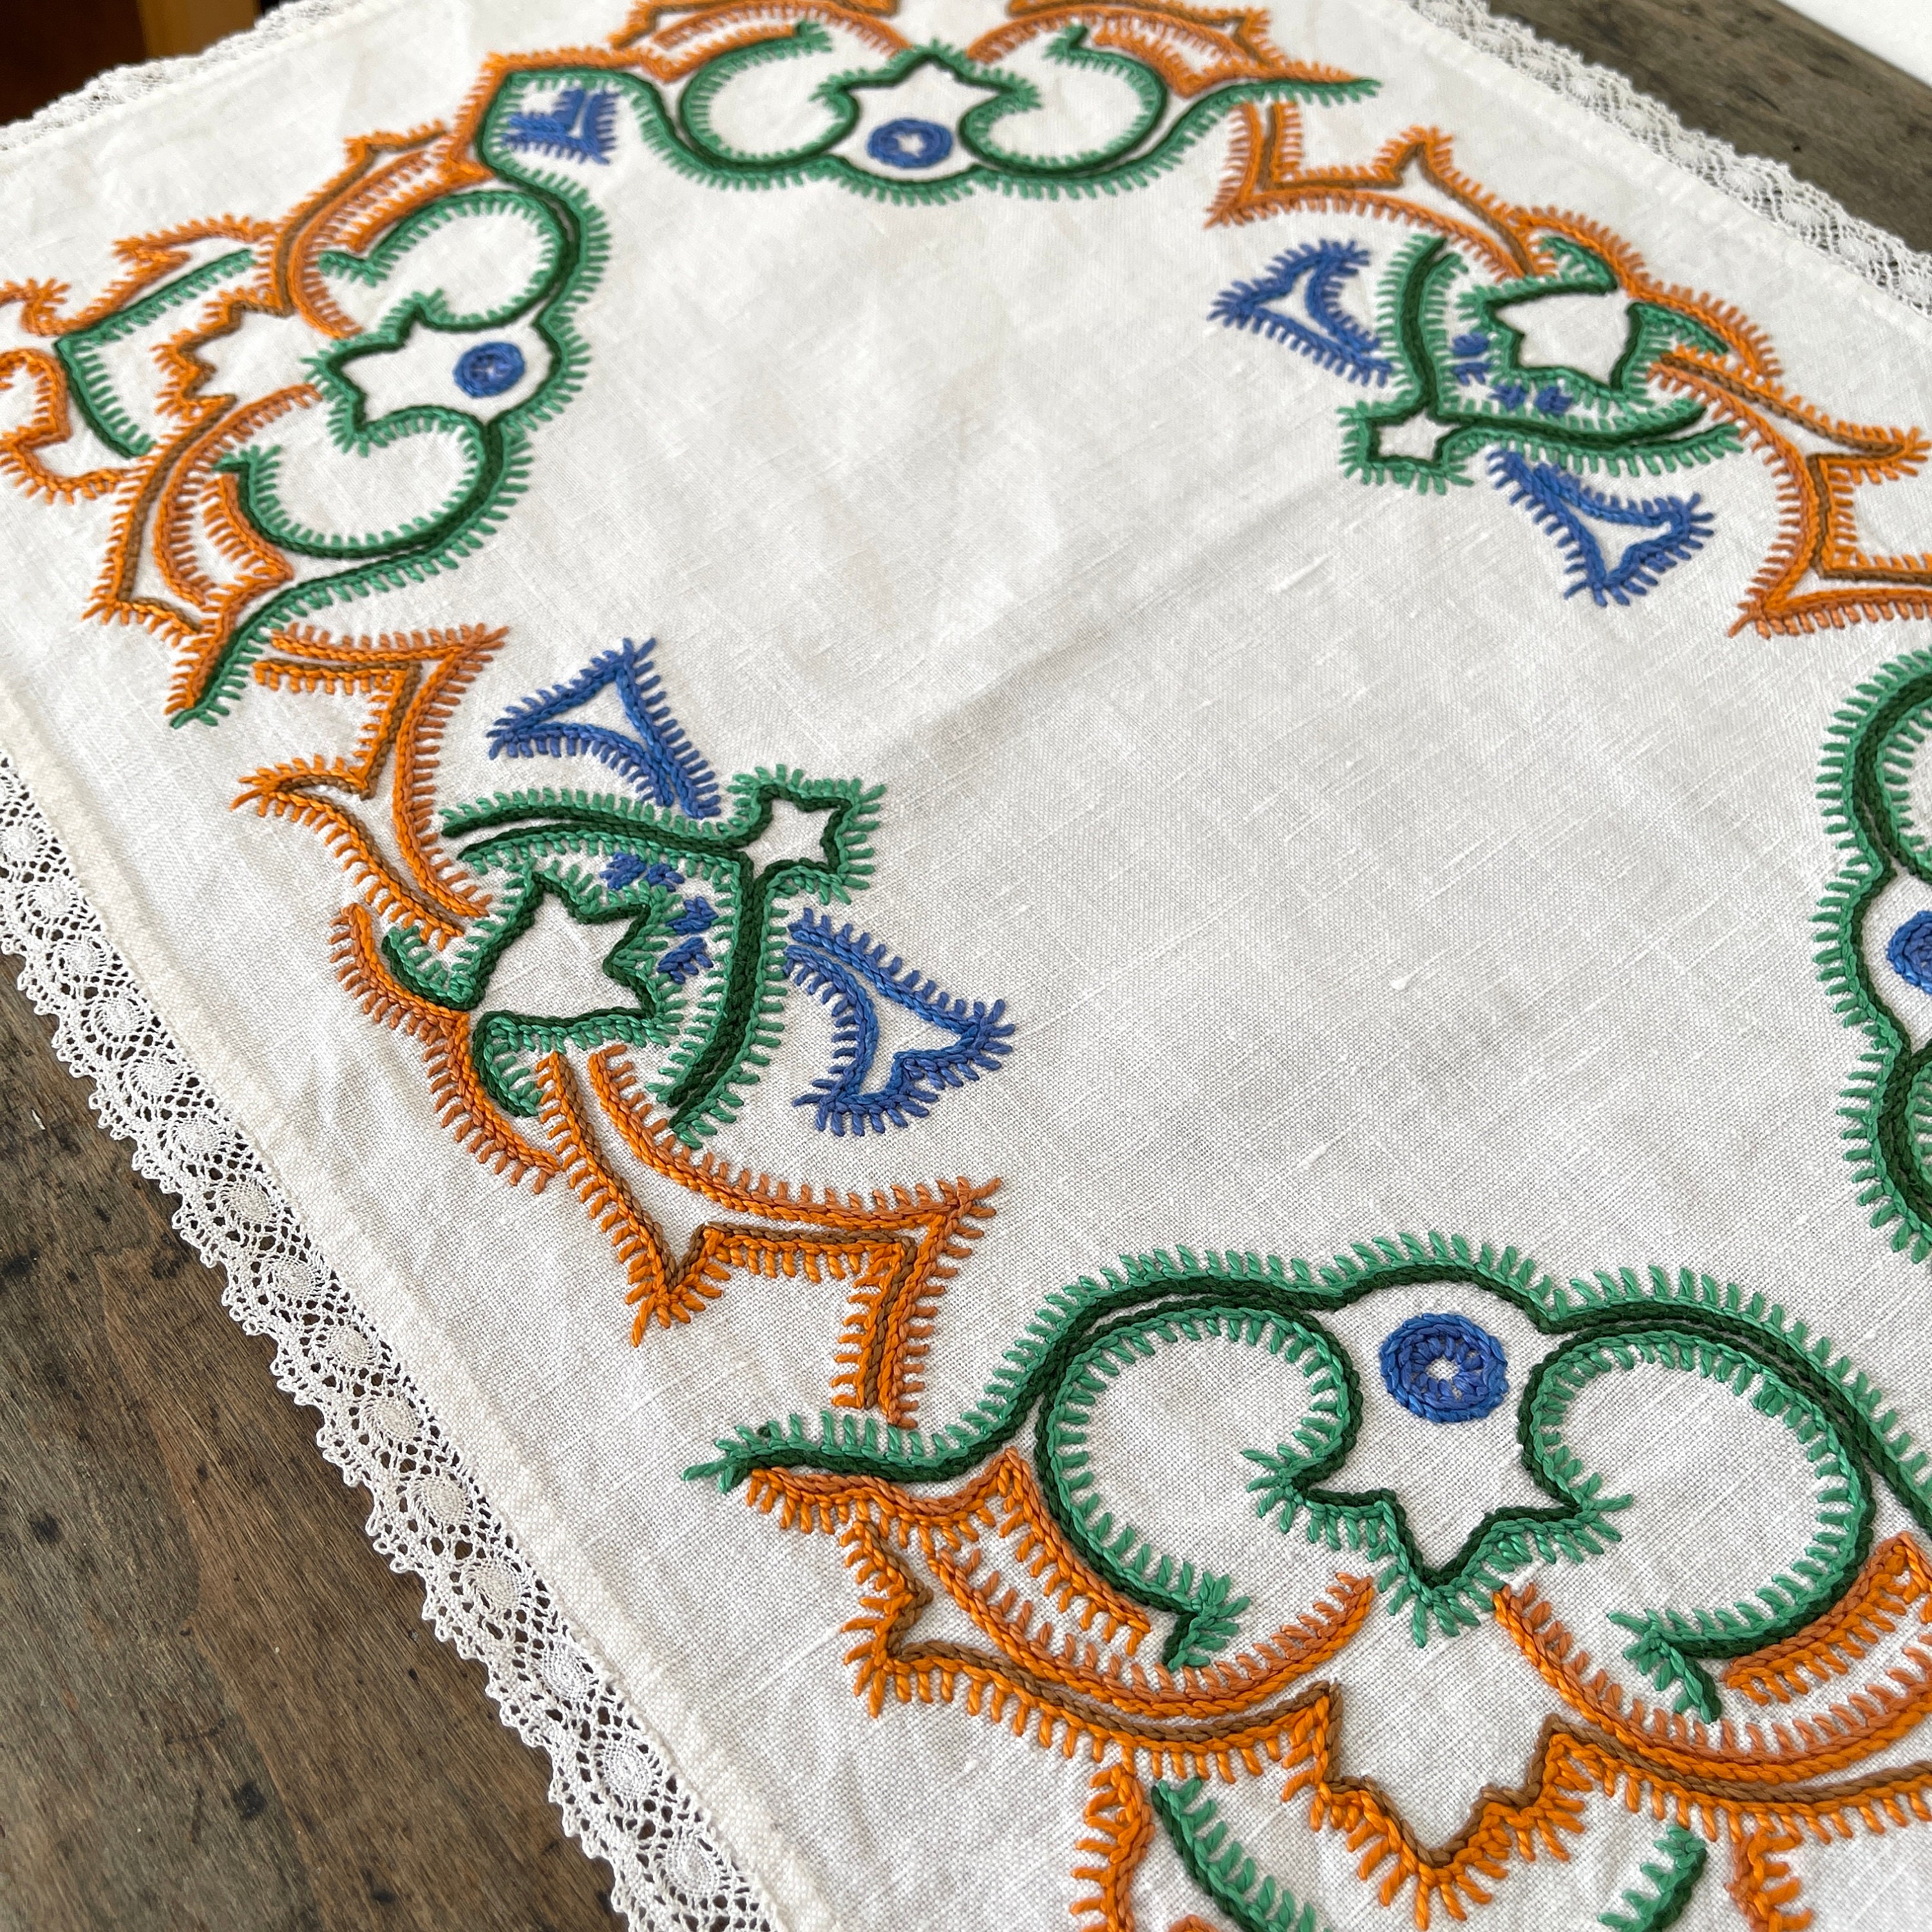 French Vintage Cloth/Tablette Napperon Broderie Cottage Country Style Handmade Romantic White Orange